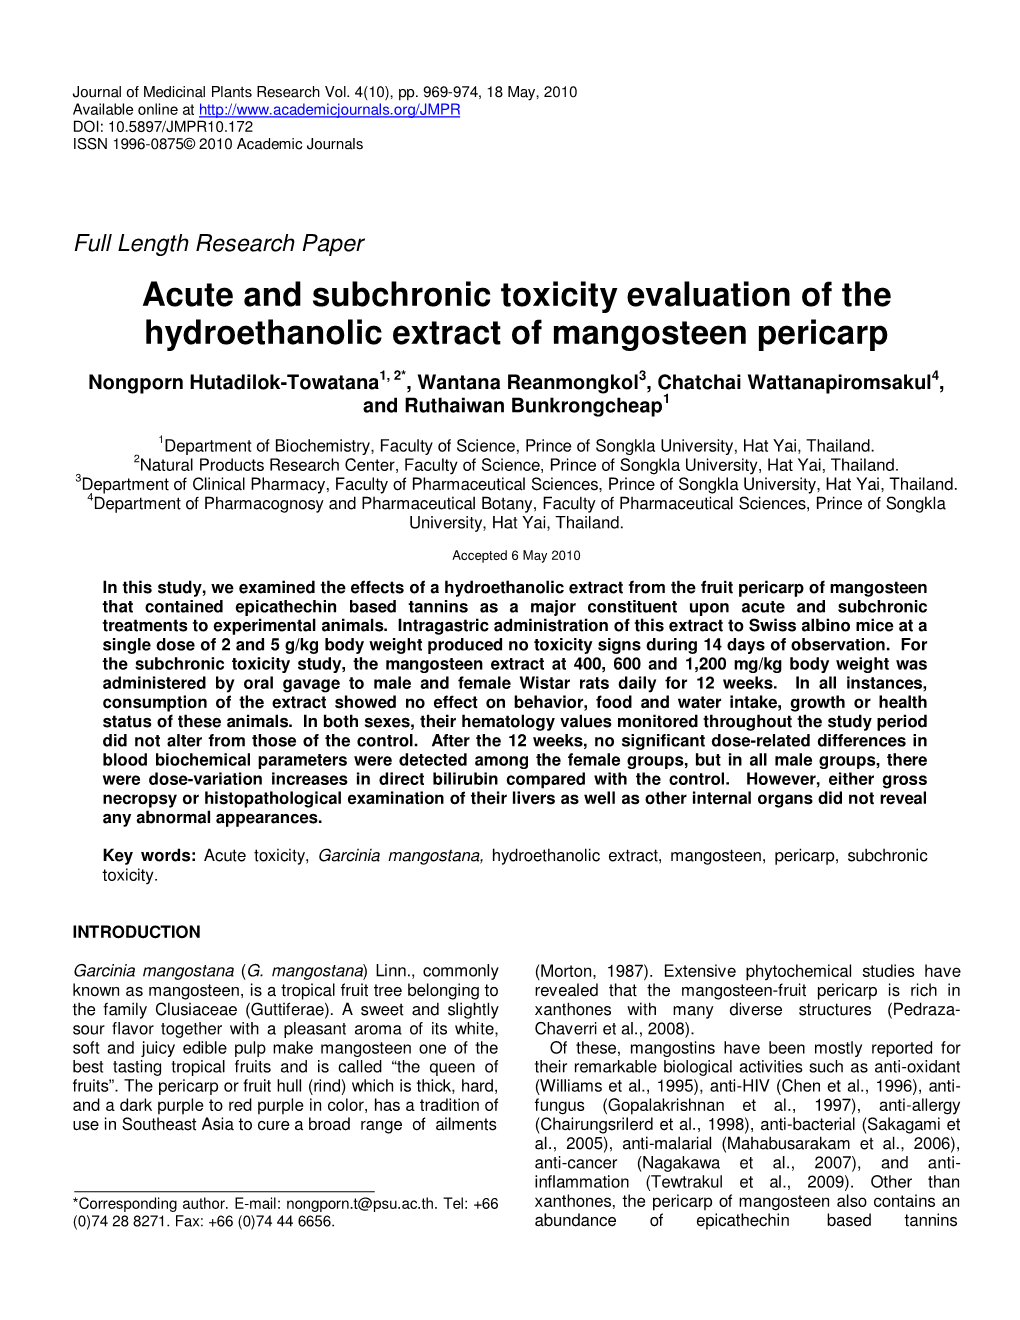 Acute and Subchronic Toxicity Evaluation of the Hydroethanolic Extract of Mangosteen Pericarp